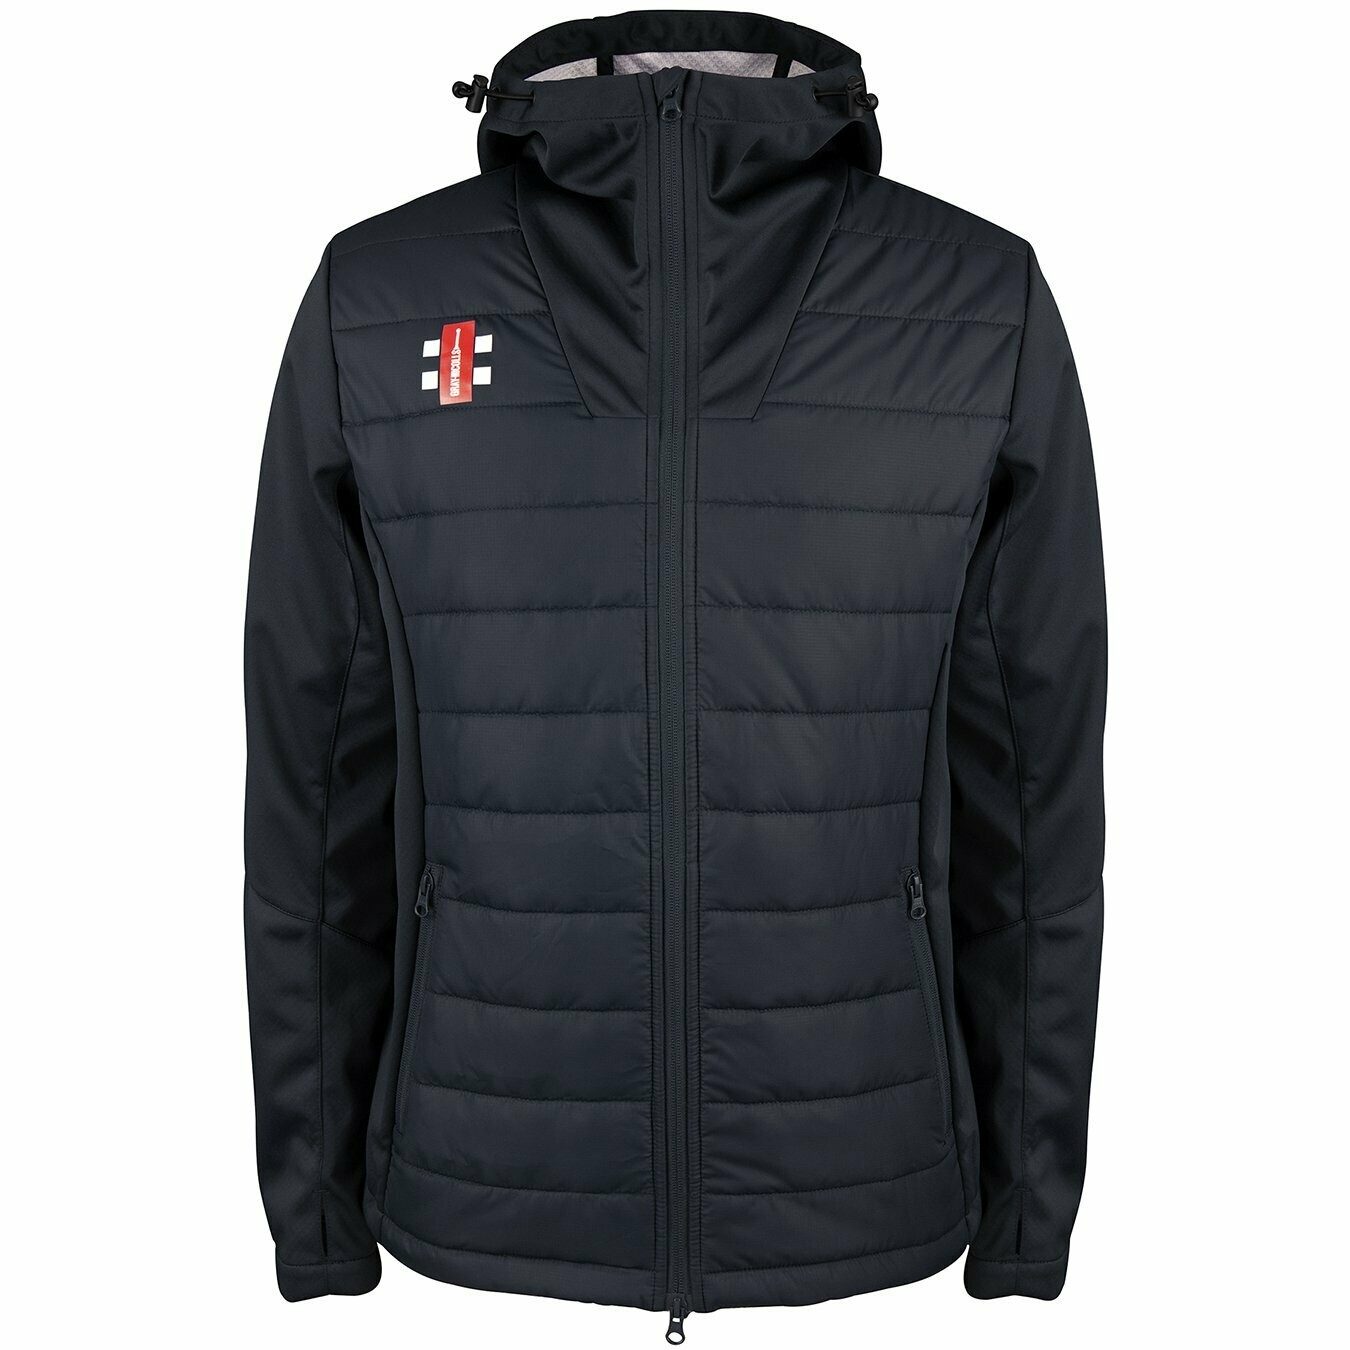 Morpeth Pro Performance Outdoor Jacket